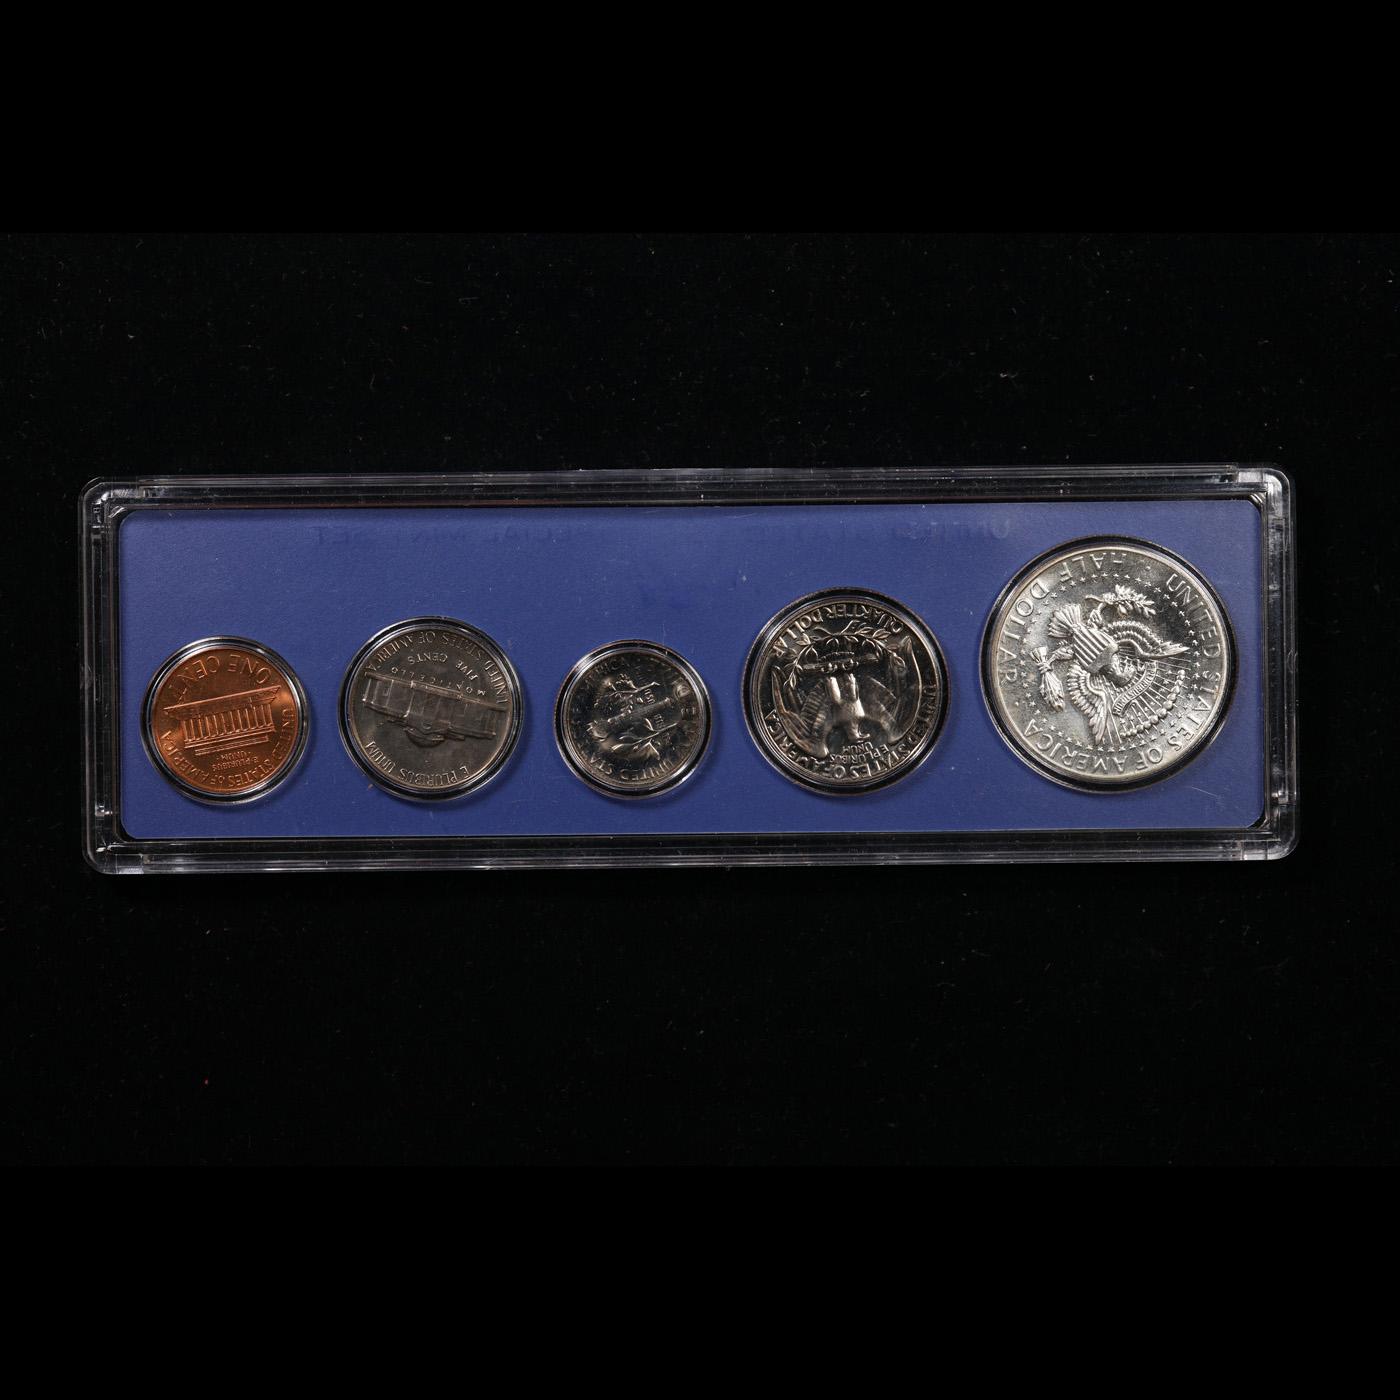 Group of 3 United States Special Mint Set in Original Government Packaging! From 1965-1967 with 15 C